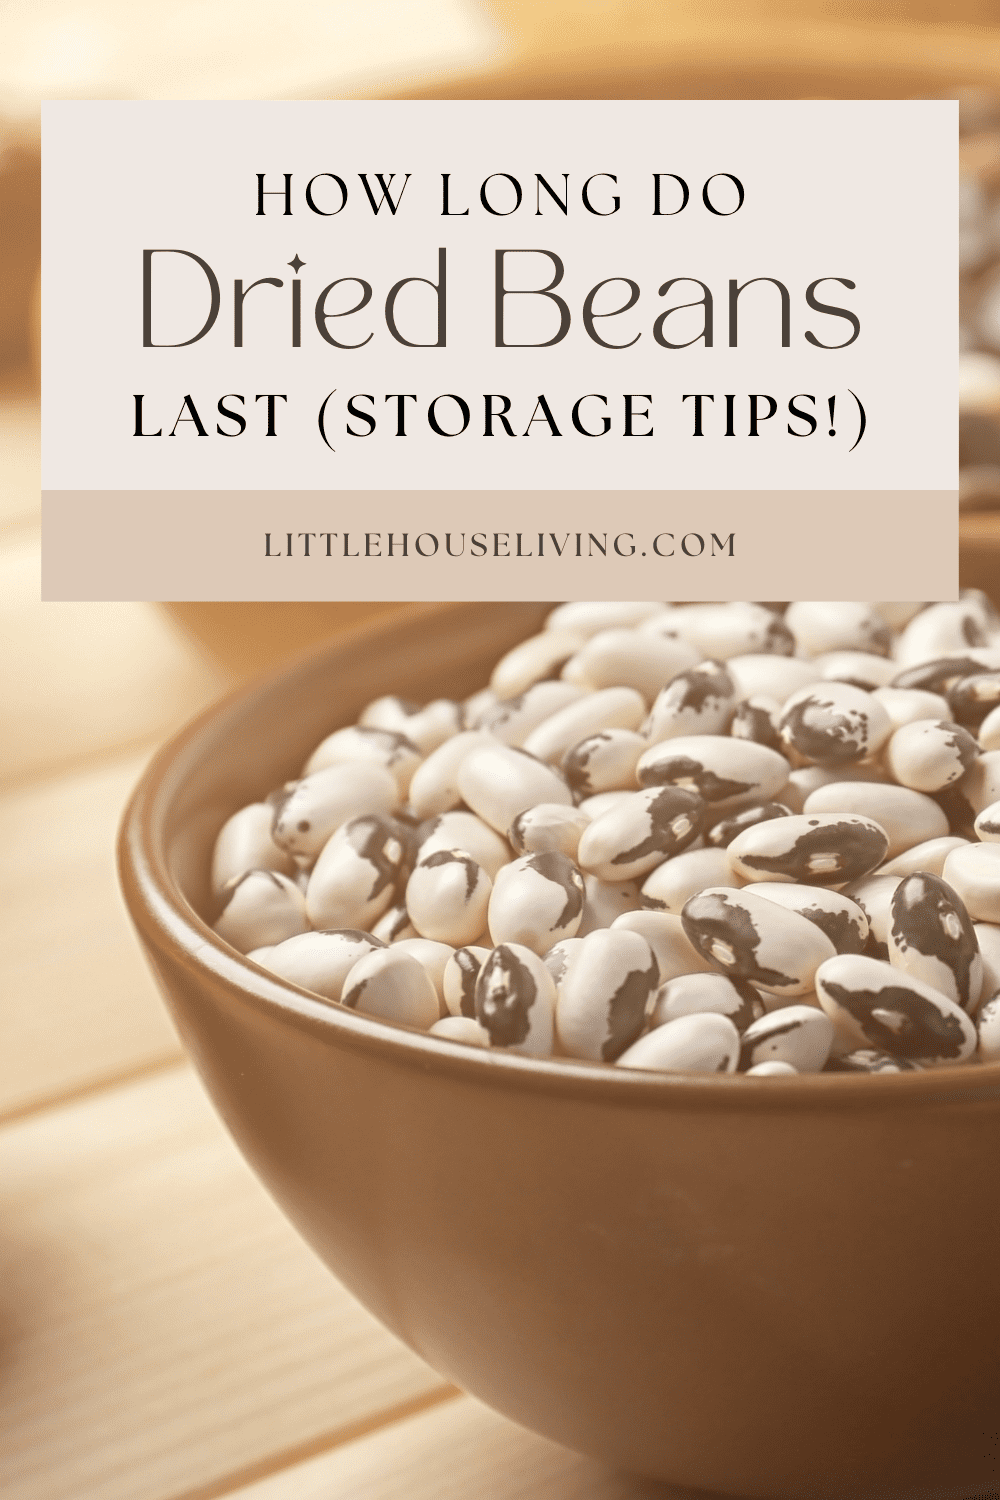 Do you want to store dried beans long-term but are not sure the best way to store them? Just how long do dried beans last? Let's learn together today so that you can build your stockpile tomorrow!